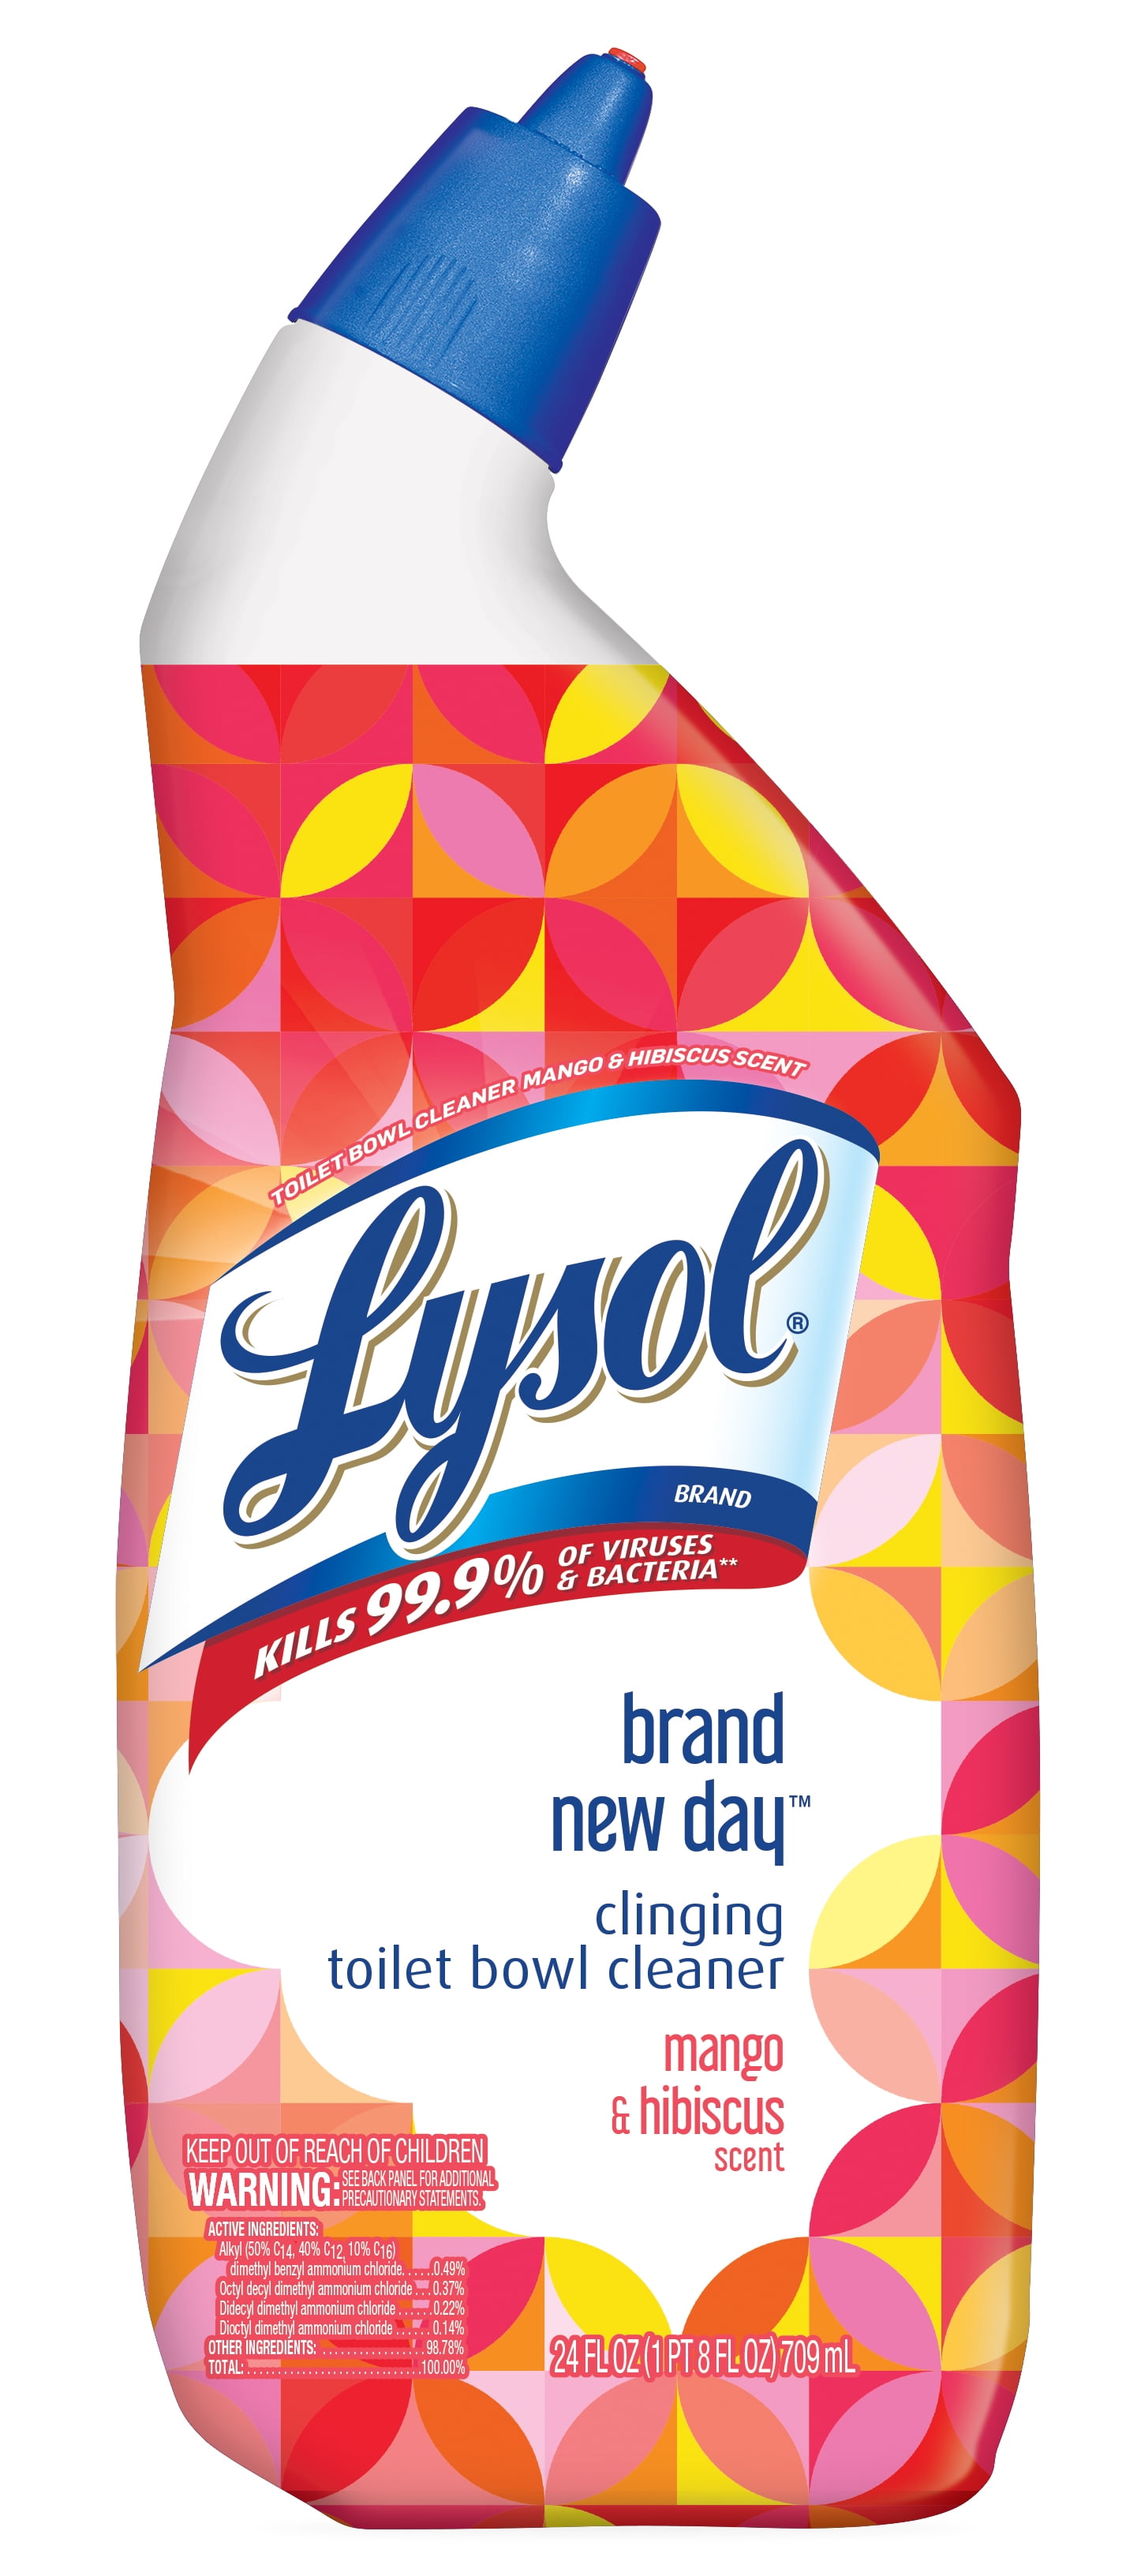 Lysol Toilet Bowl Cleaner Gel, For Cleaning and Disinfecting, Stain Removal, Brand New Day, Mango and Hibiscus, 24oz